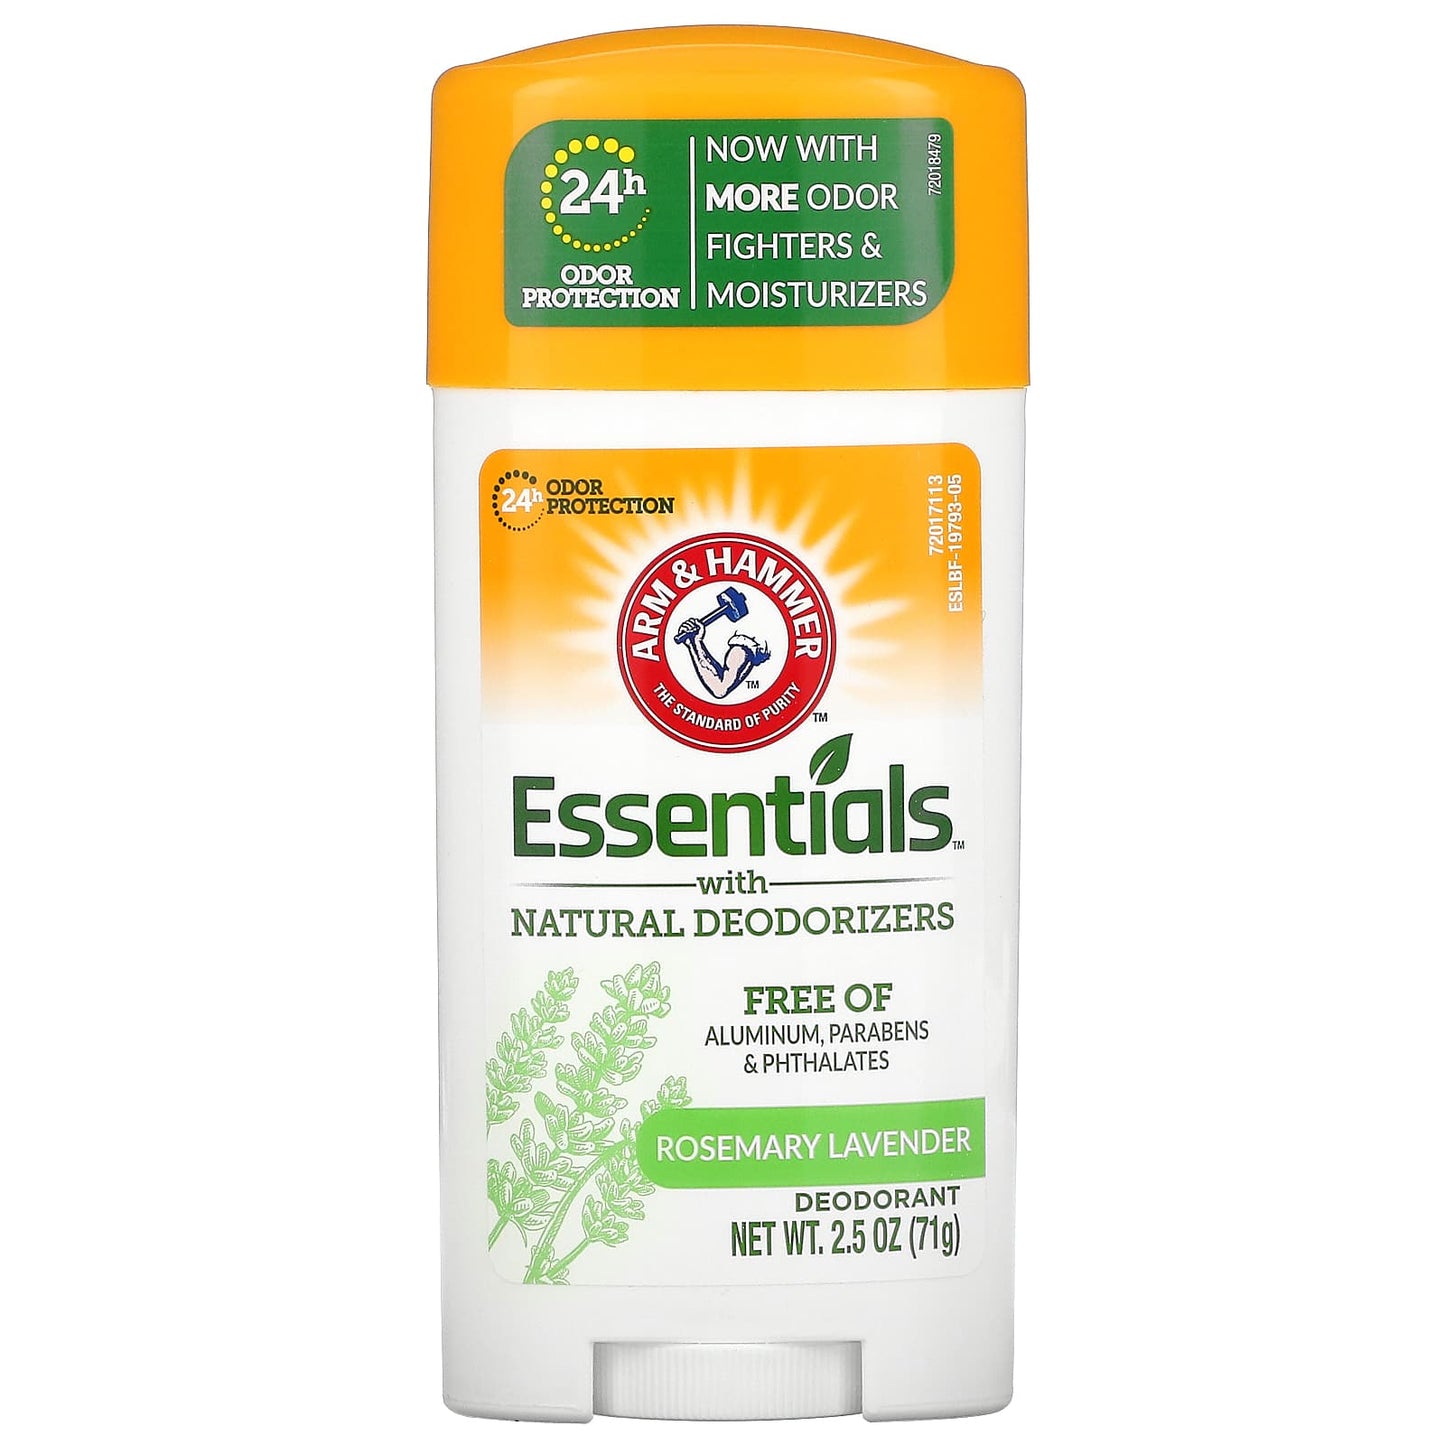 Arm & Hammer-Essentials with Natural Deodorizers-Deodorant-Rosemary Lavender-2.5 oz (71 g)